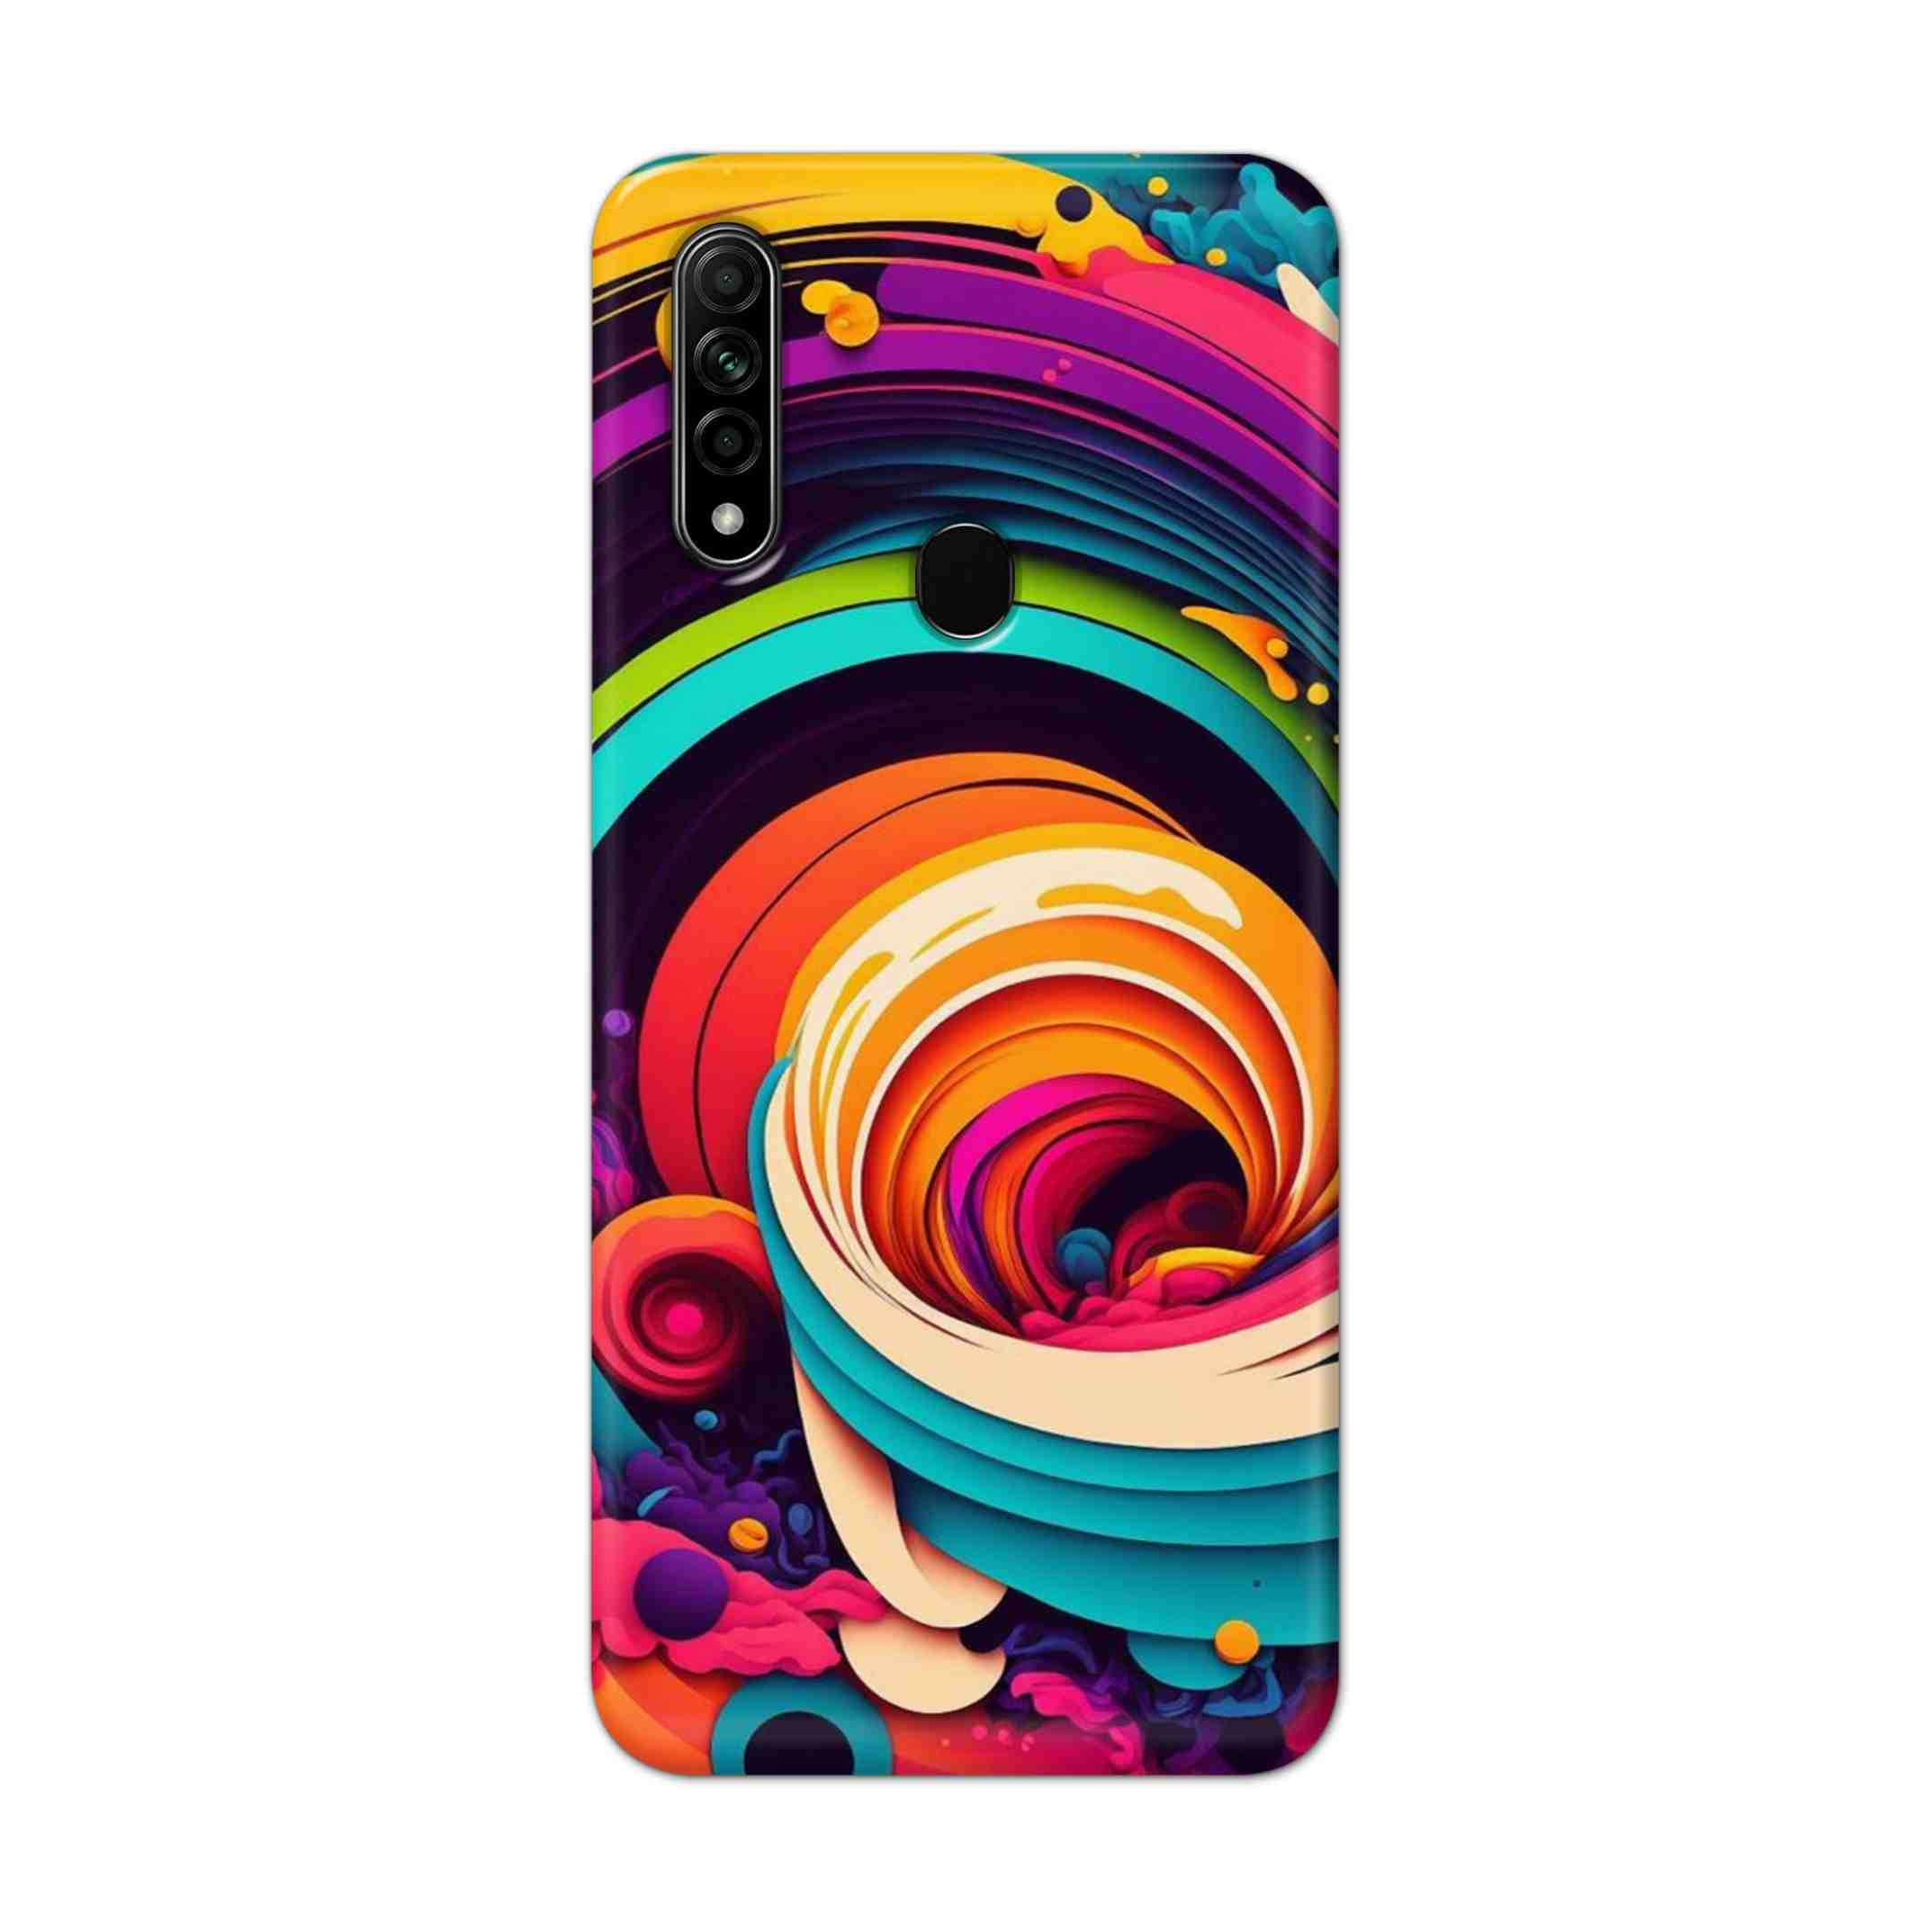 Buy Colour Circle Hard Back Mobile Phone Case Cover For Oppo A31 (2020) Online